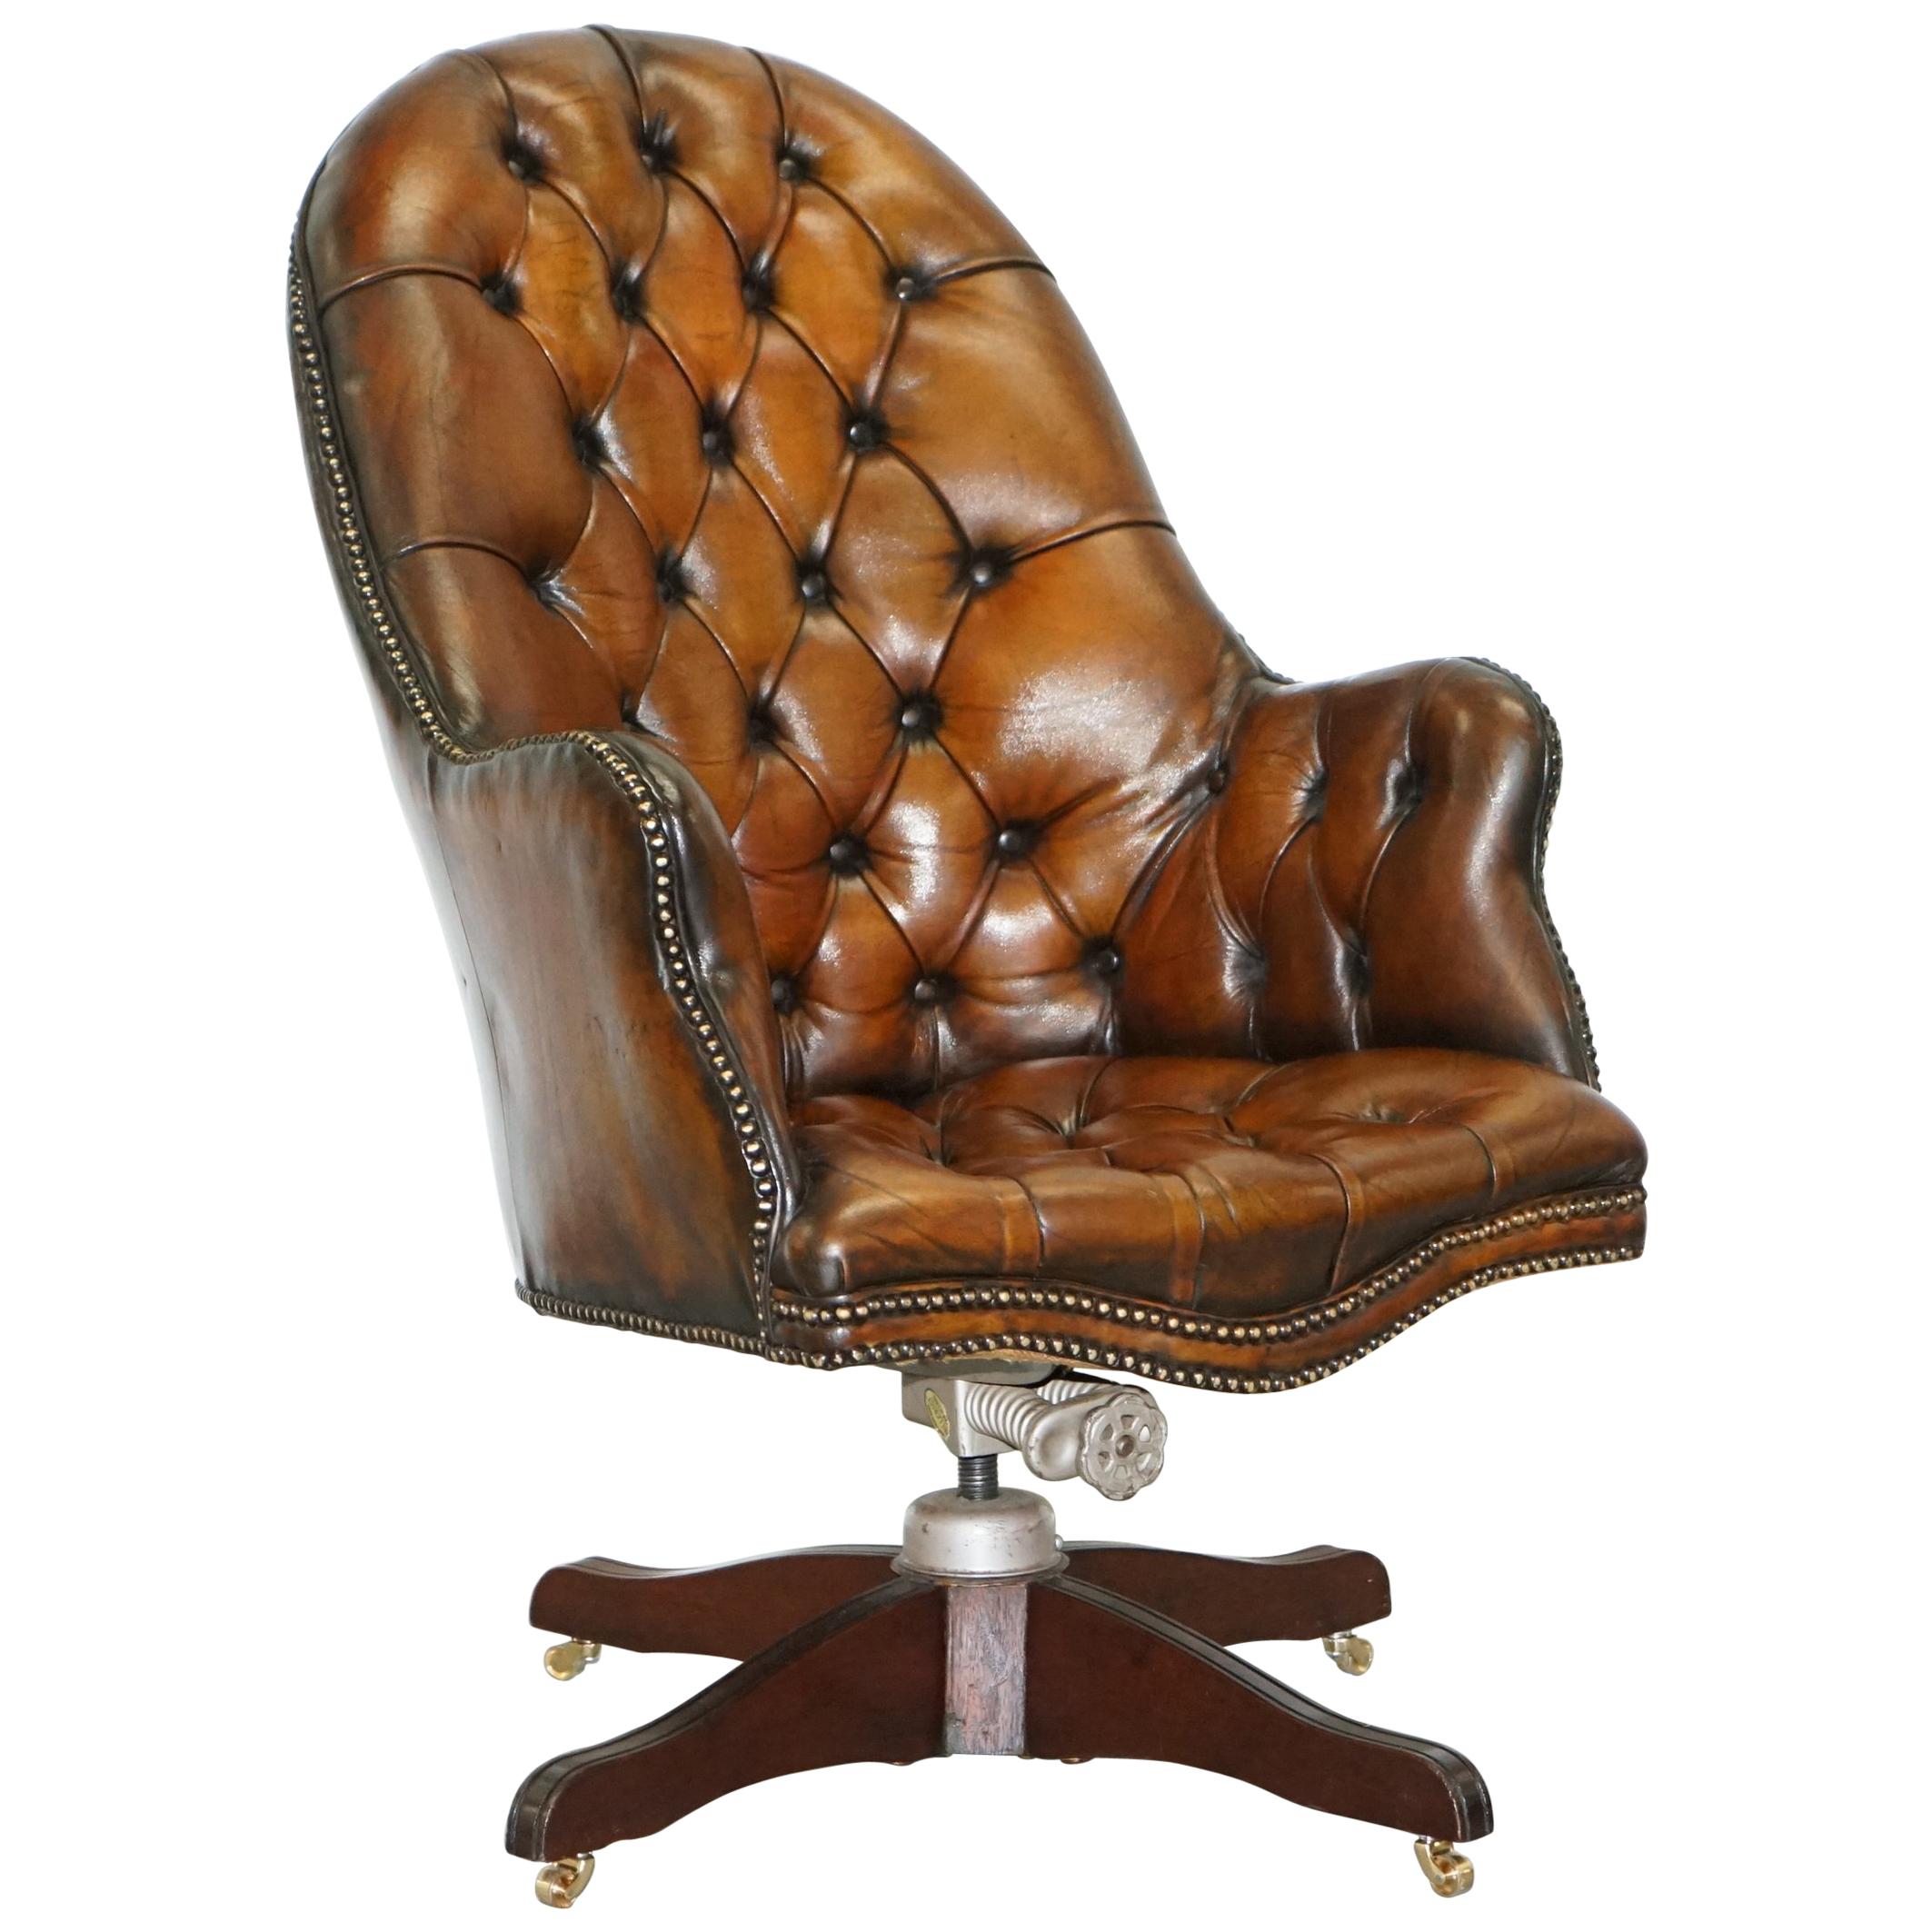 Original 1920 Hillcrest Fully Restored Brown Leather Chesterfield Captains Chair